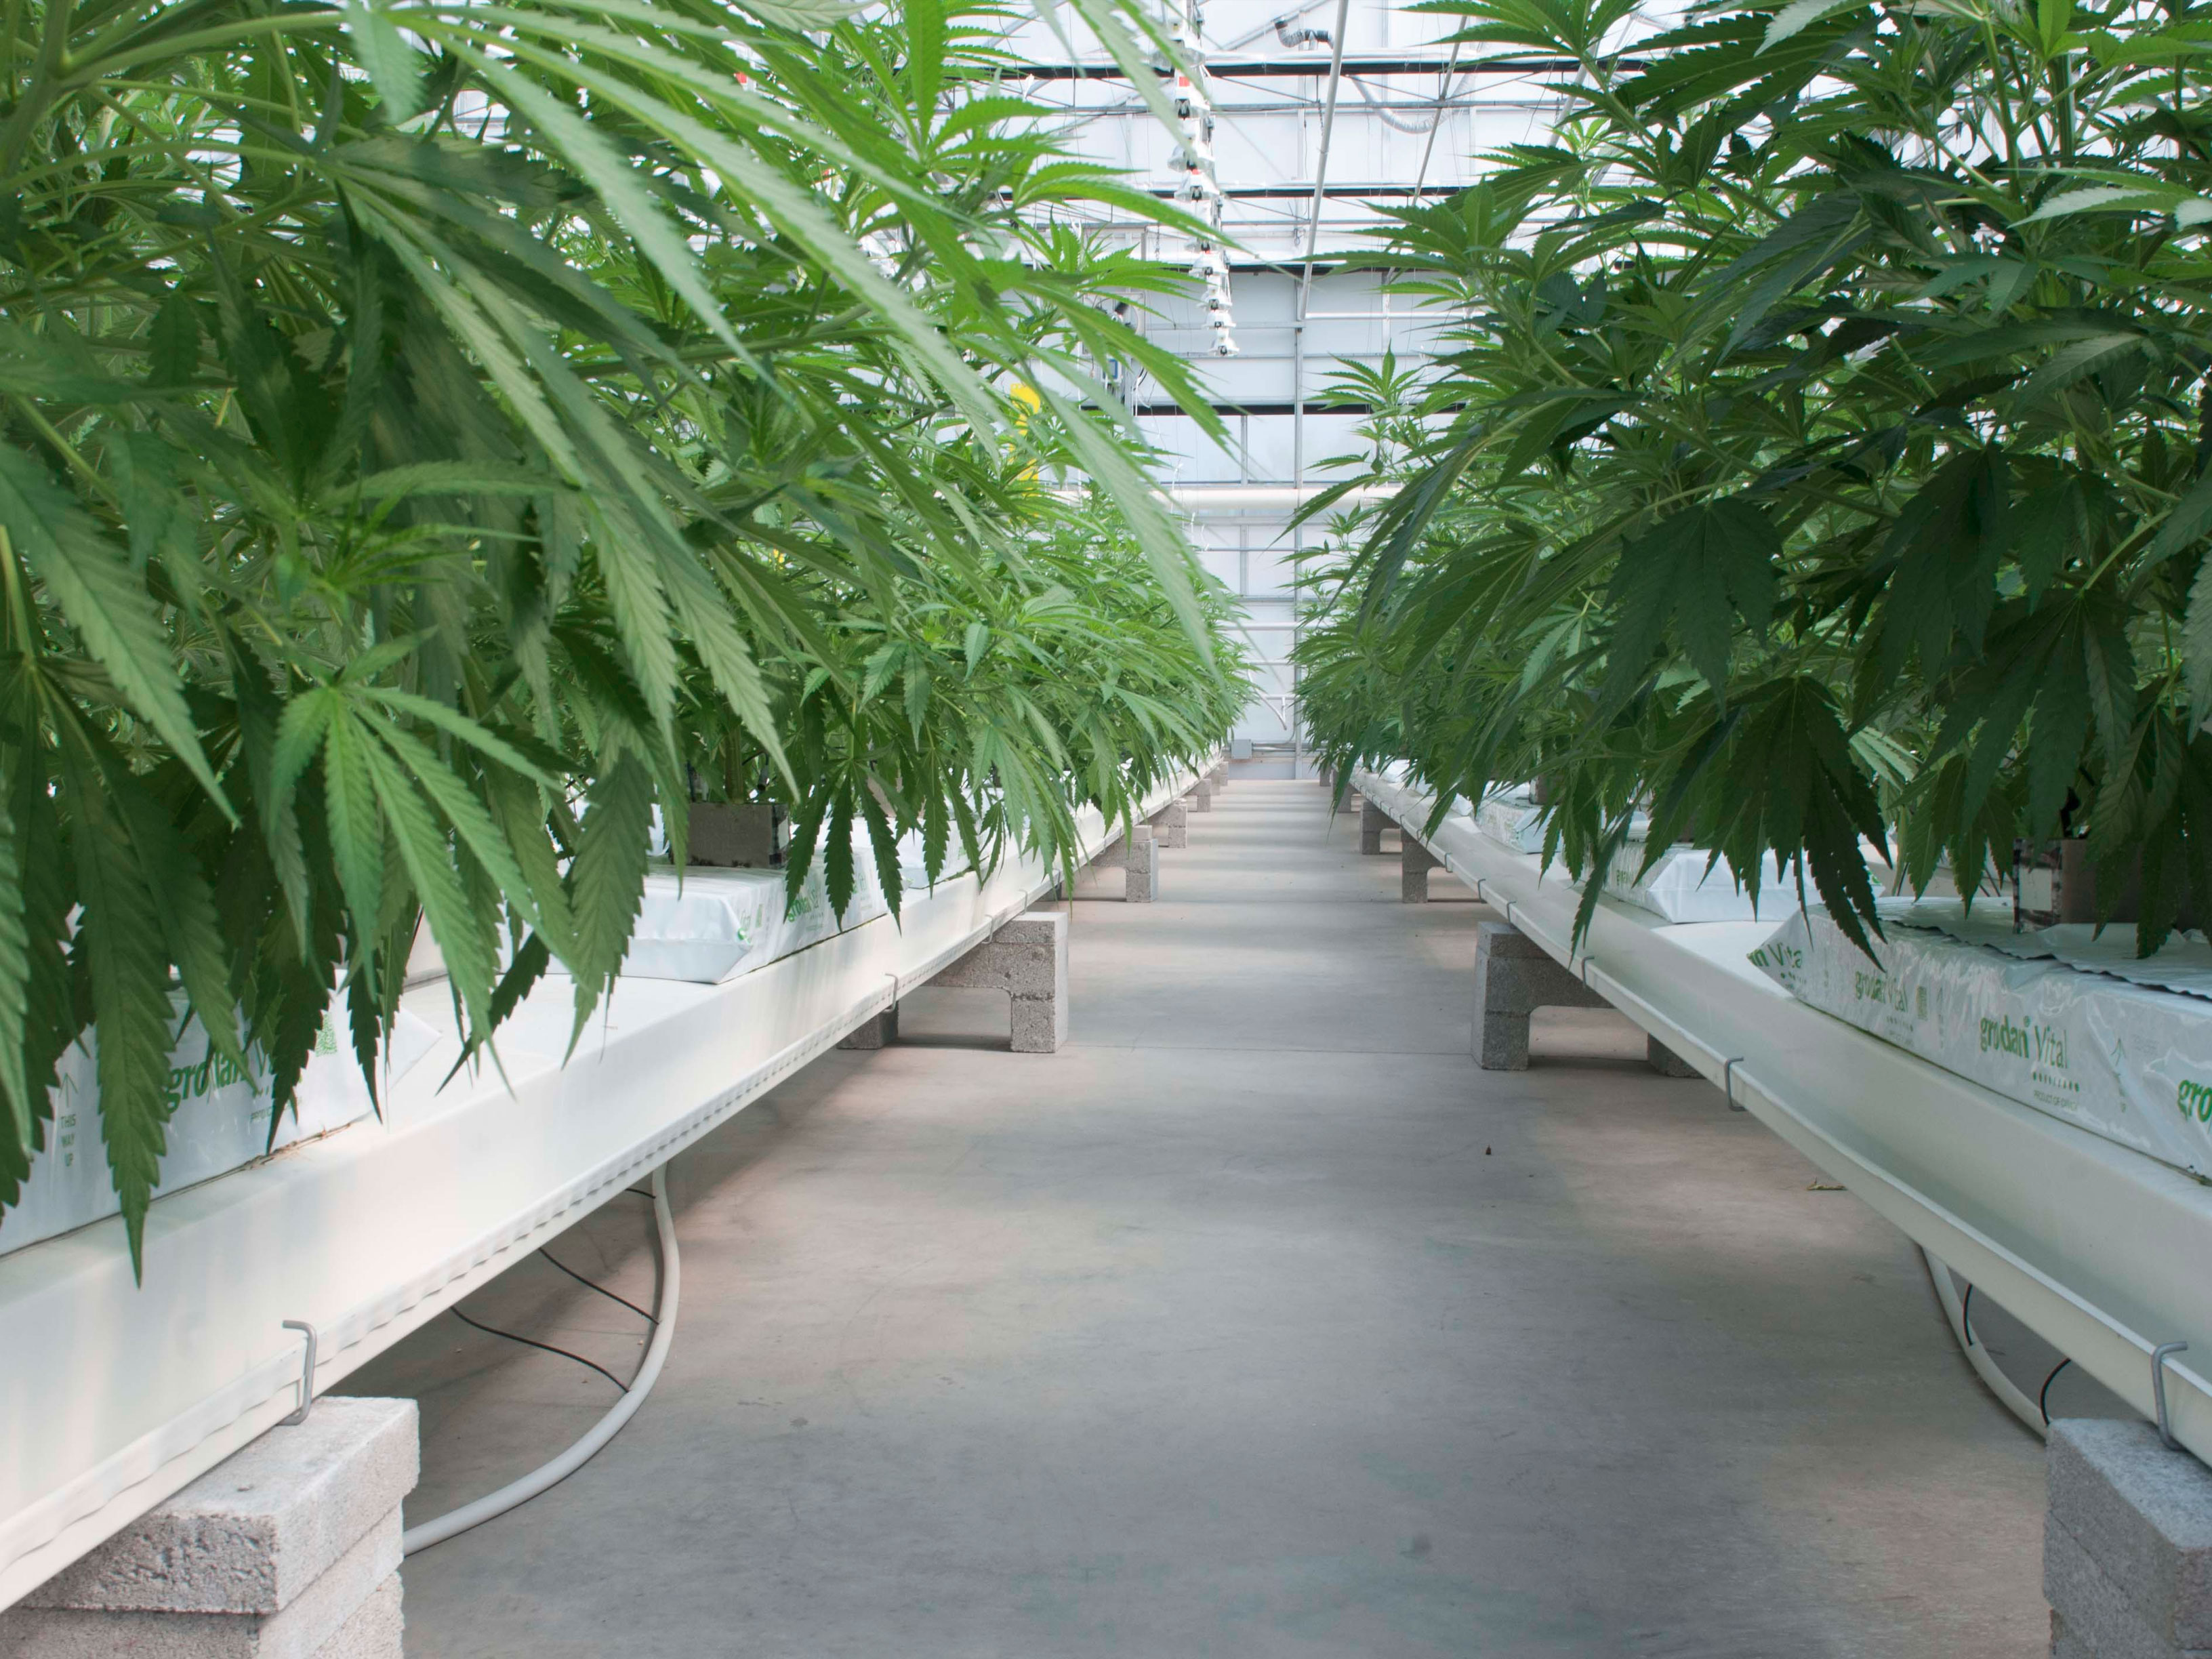 Cannabis plants produce a dense canopy in a greenhouse